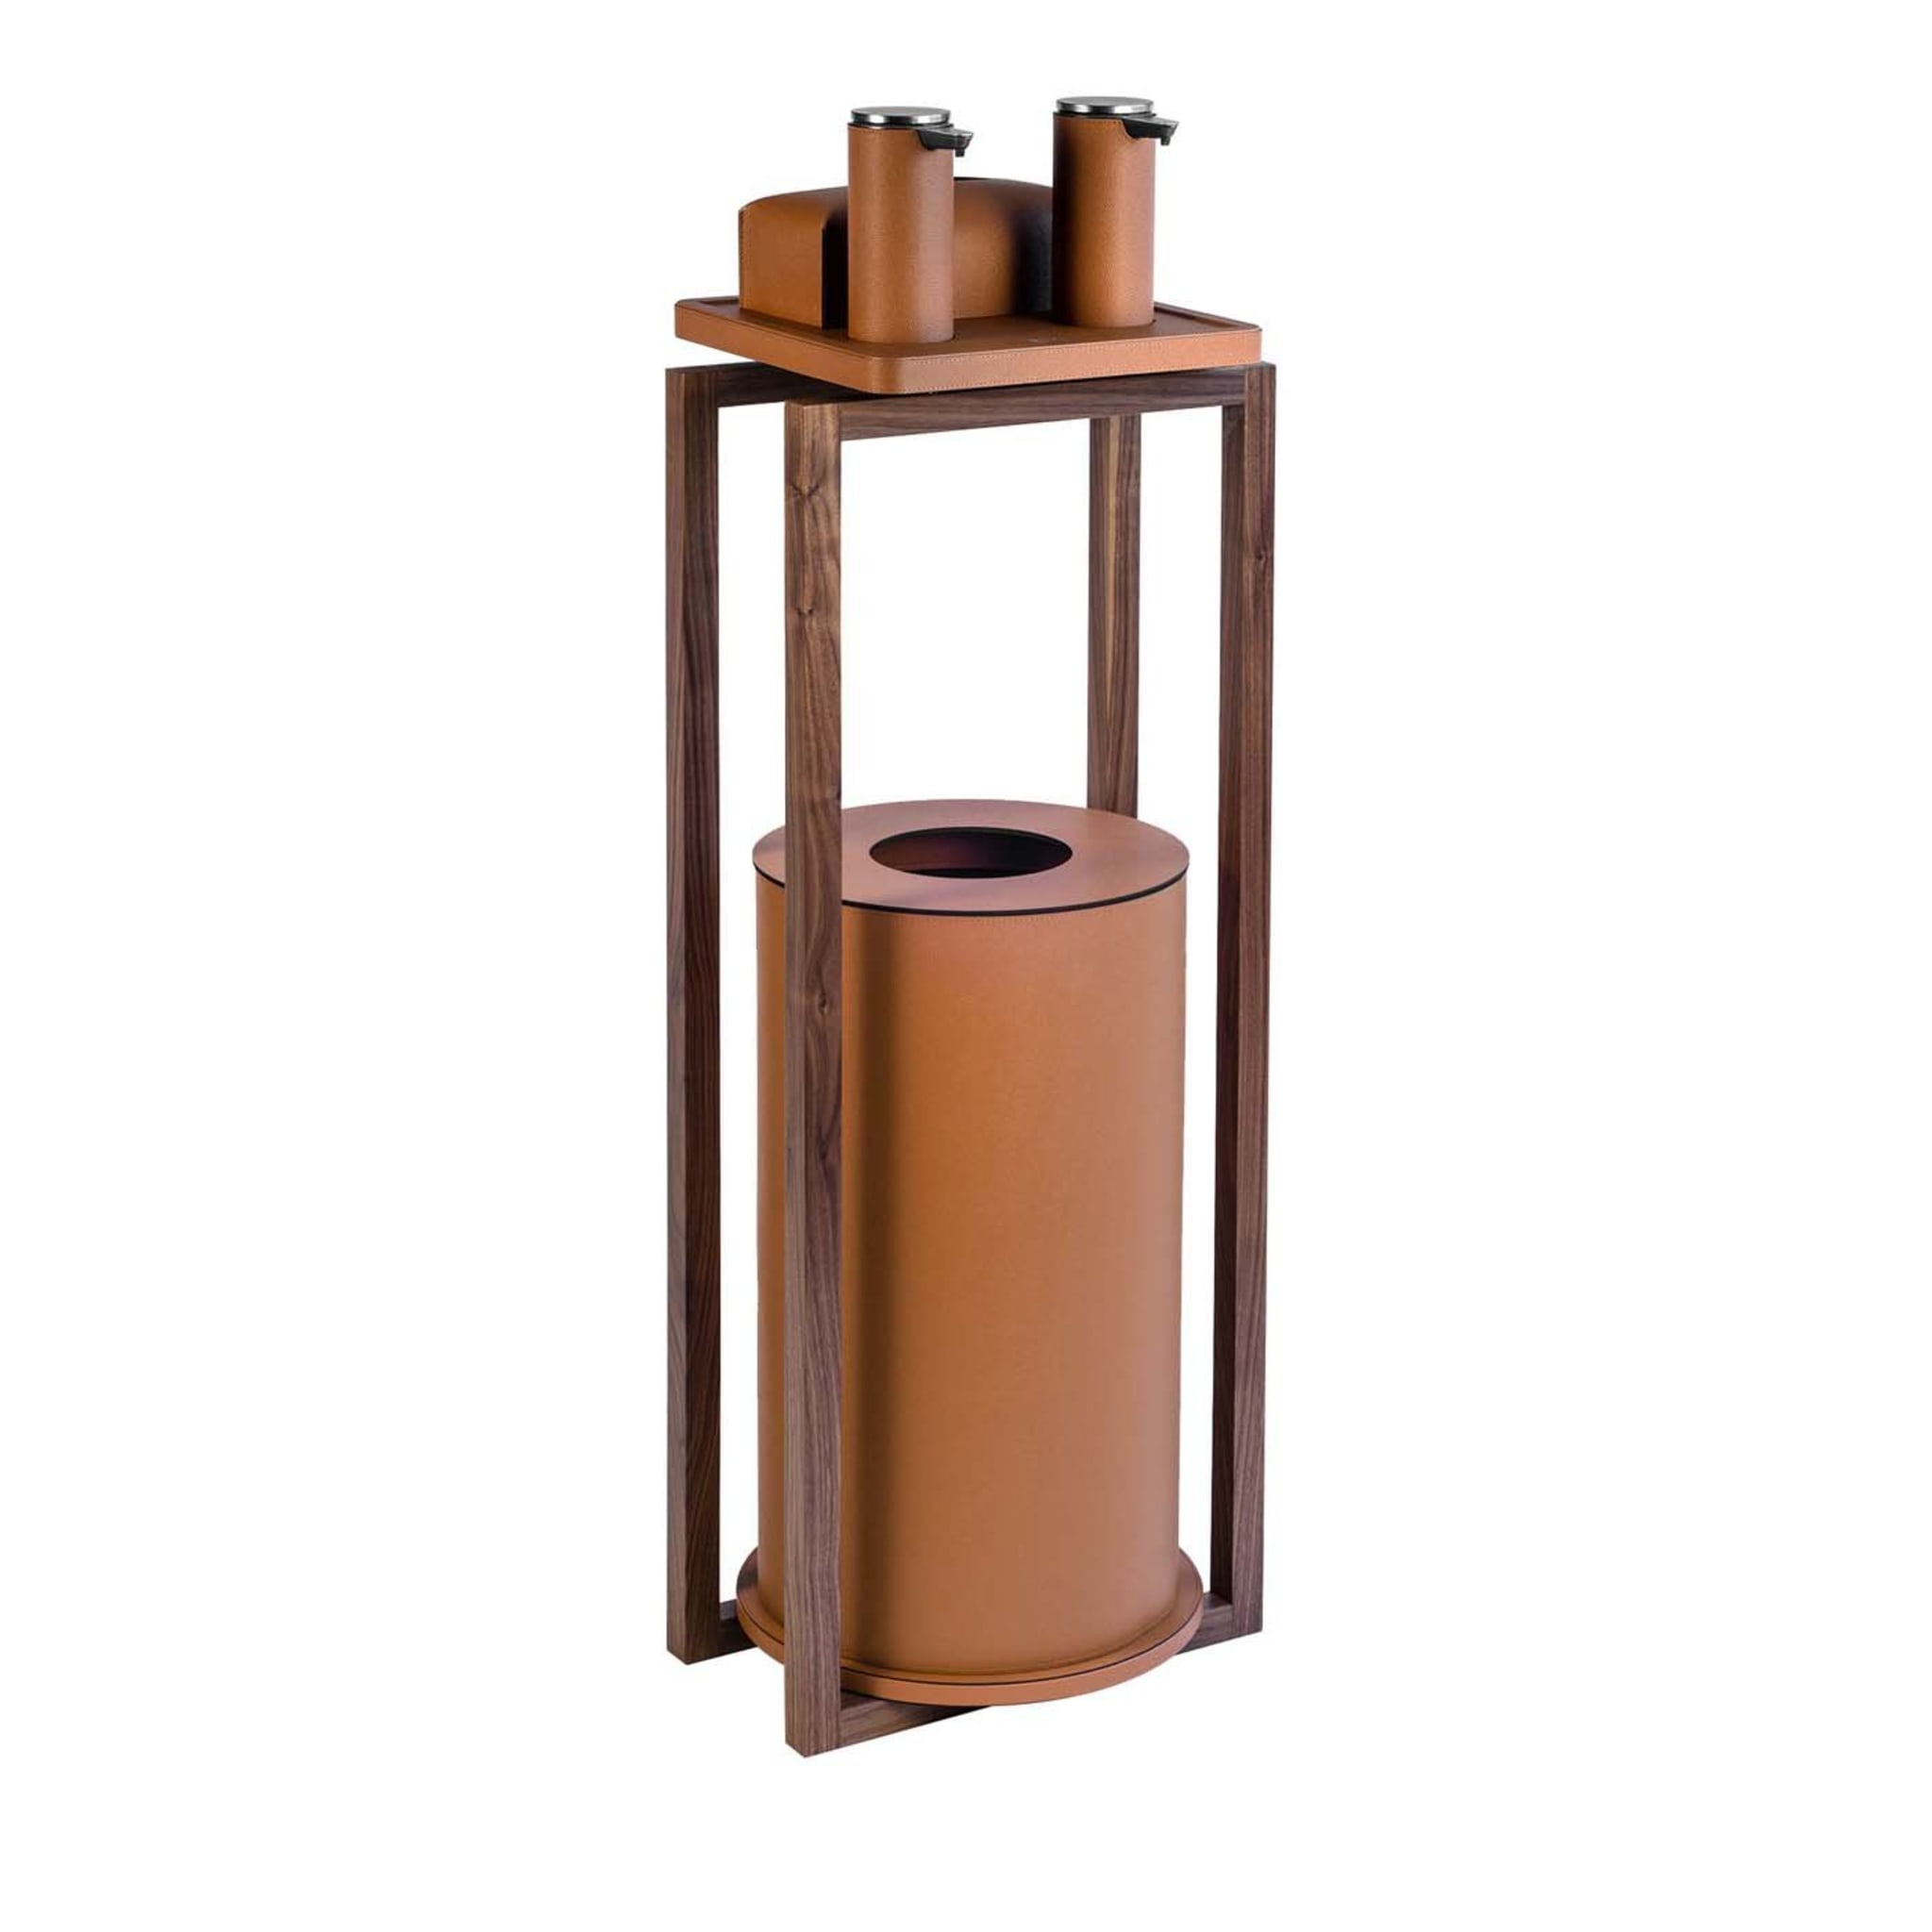 Igea Brown Leather and Walnut Sanitizing Station - Main view